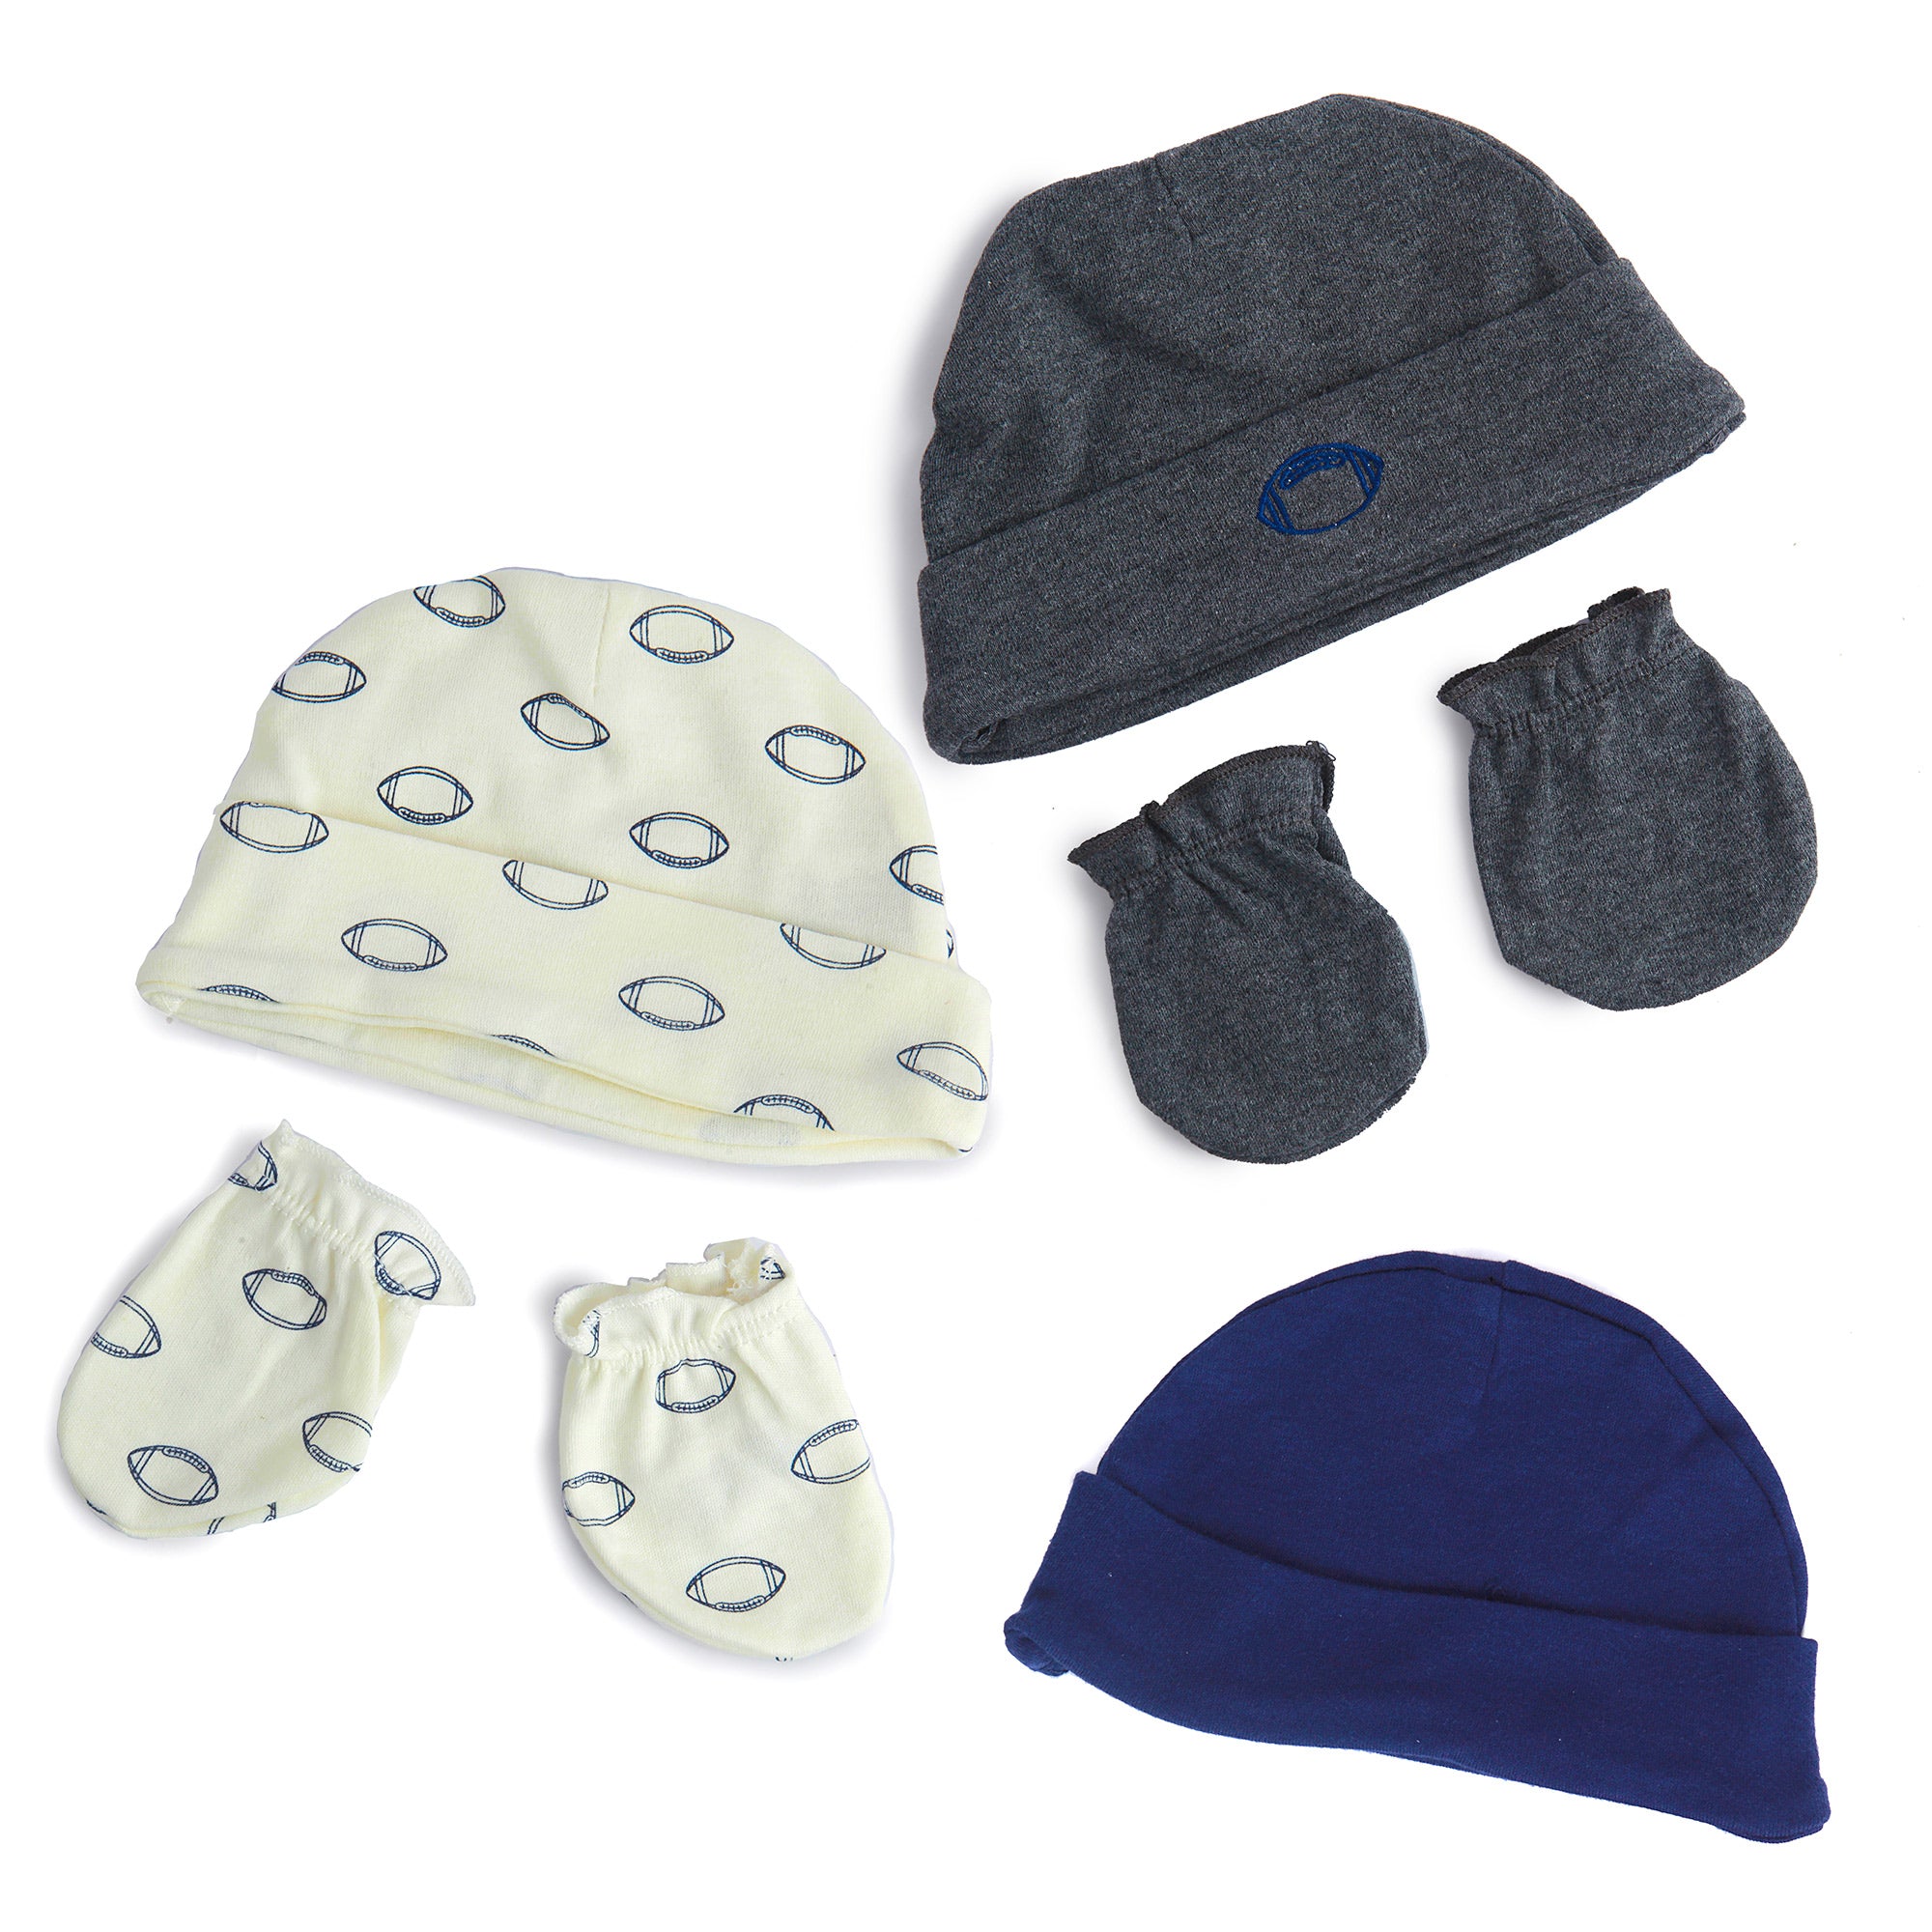 Future Sports Star Blue Set Of 3 Caps And 2 Mittens - Baby Moo